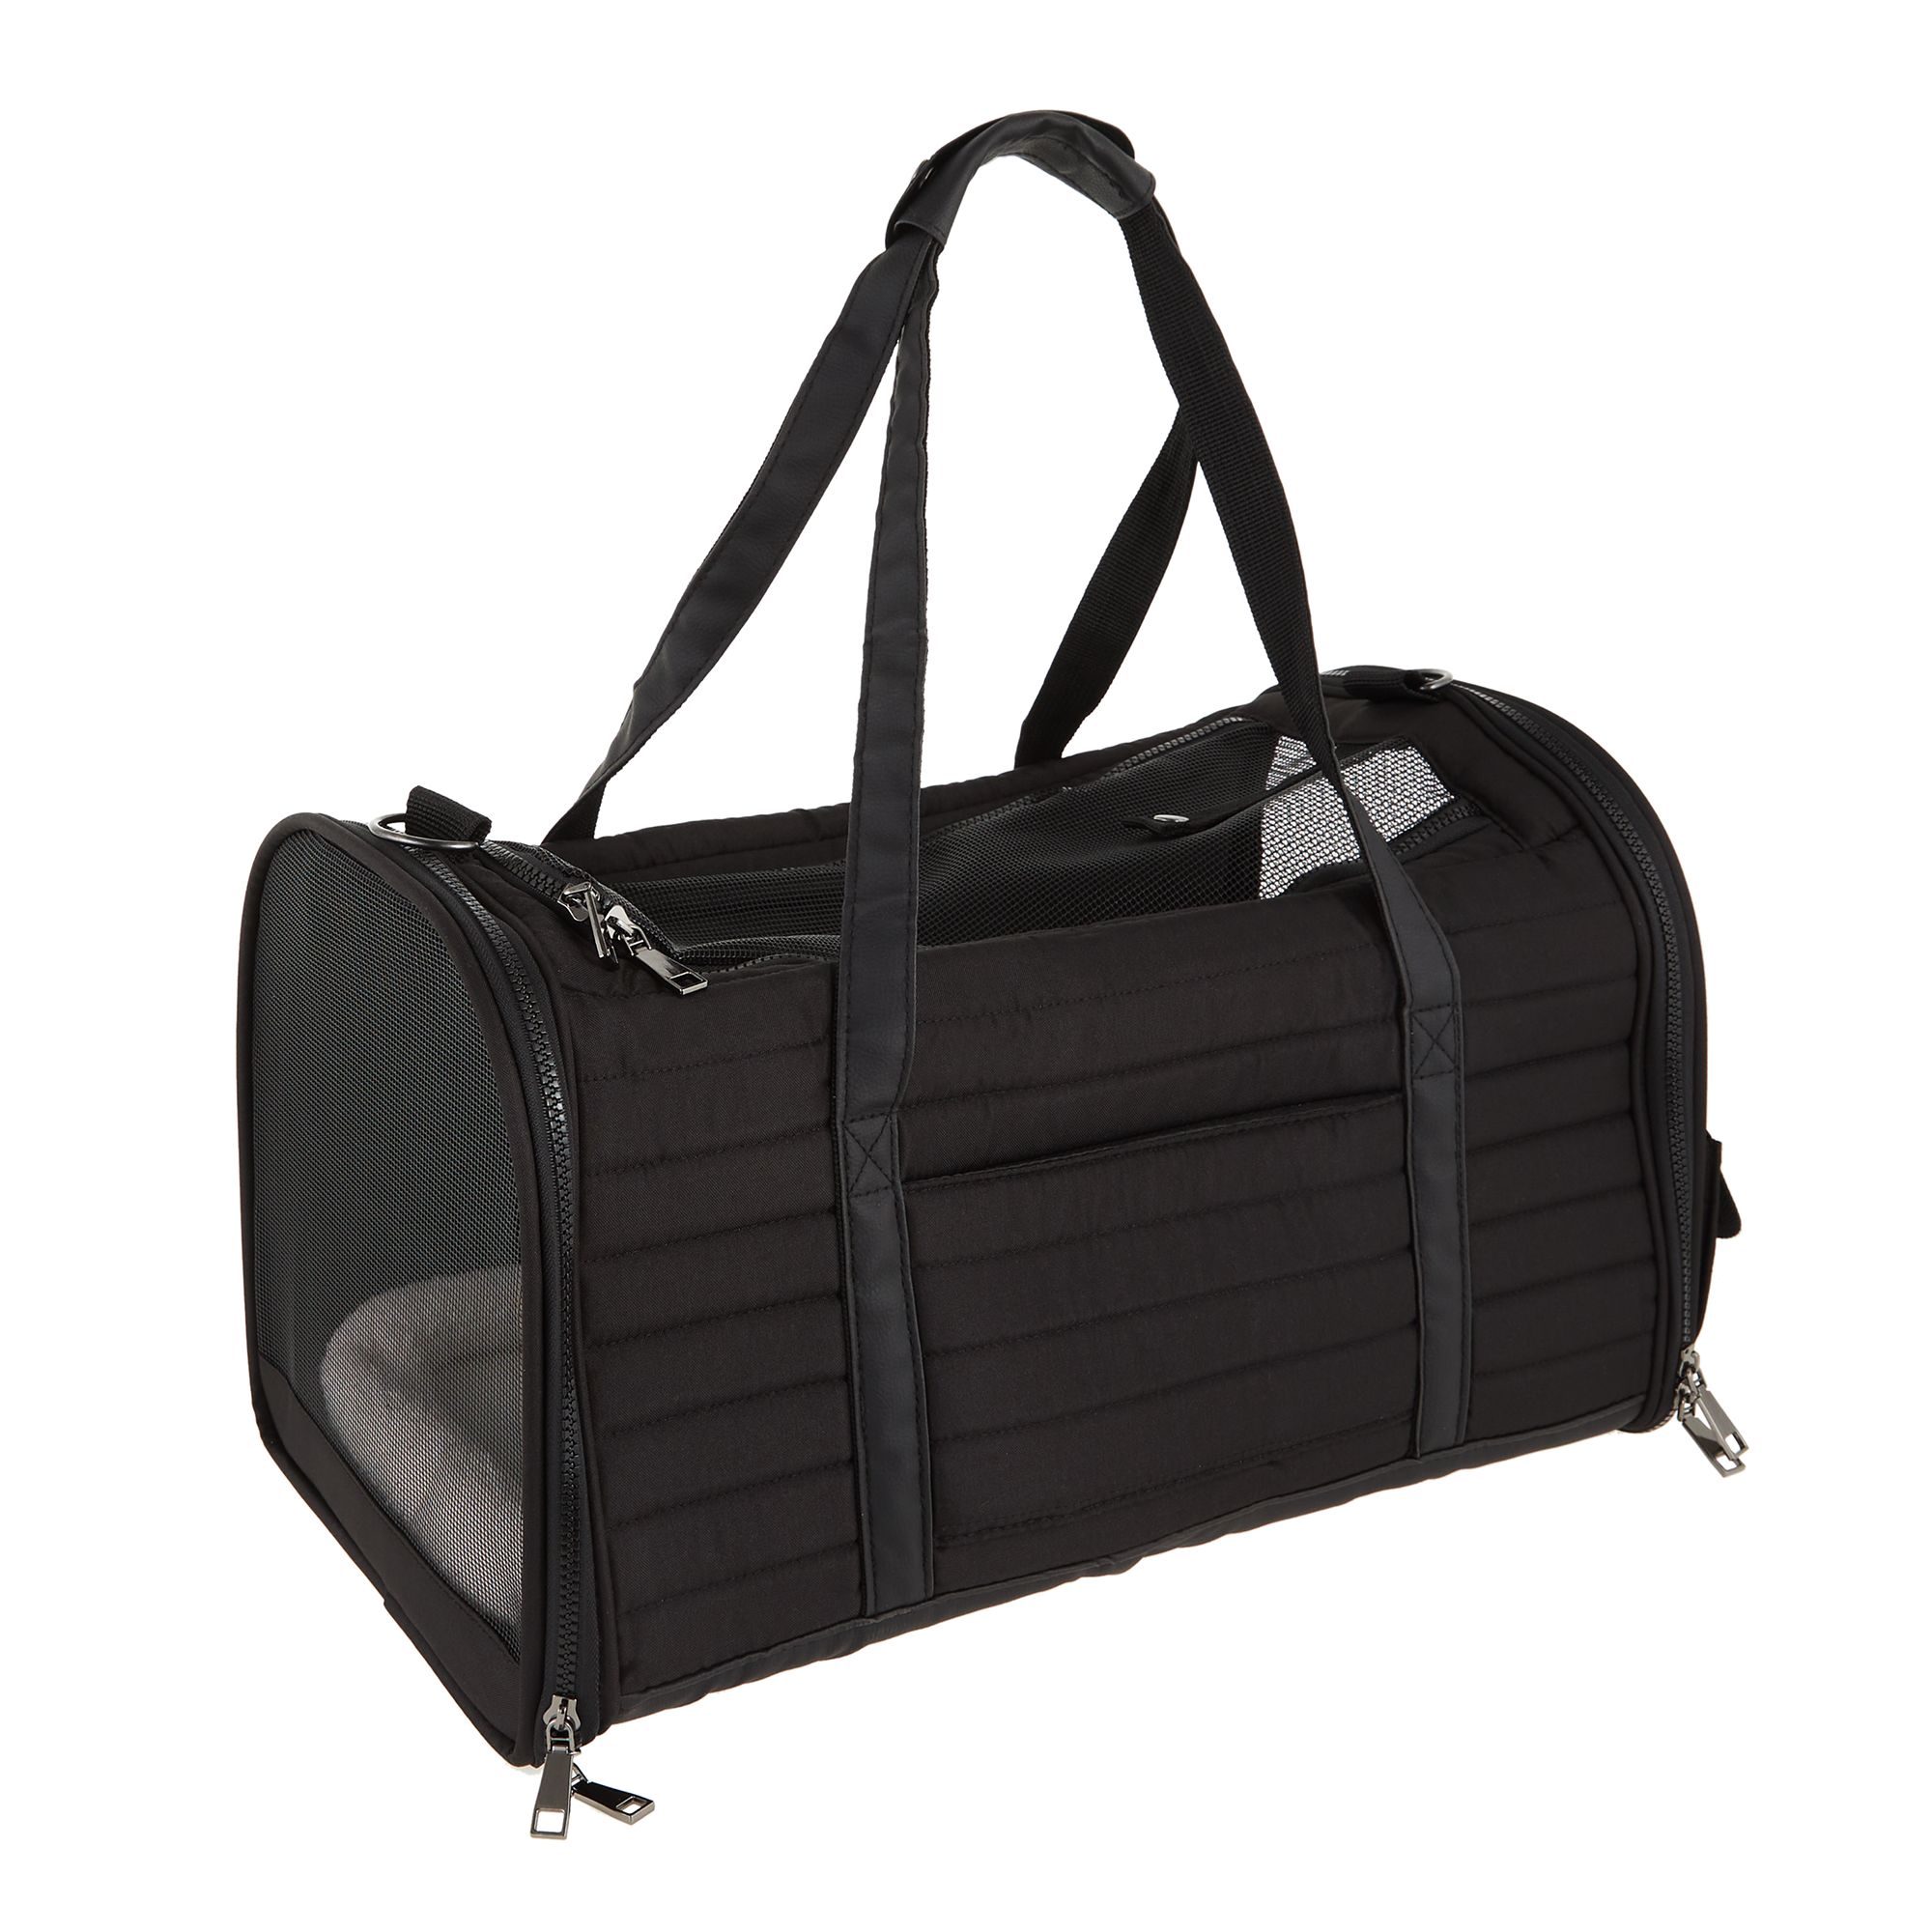 expandable travel carrier